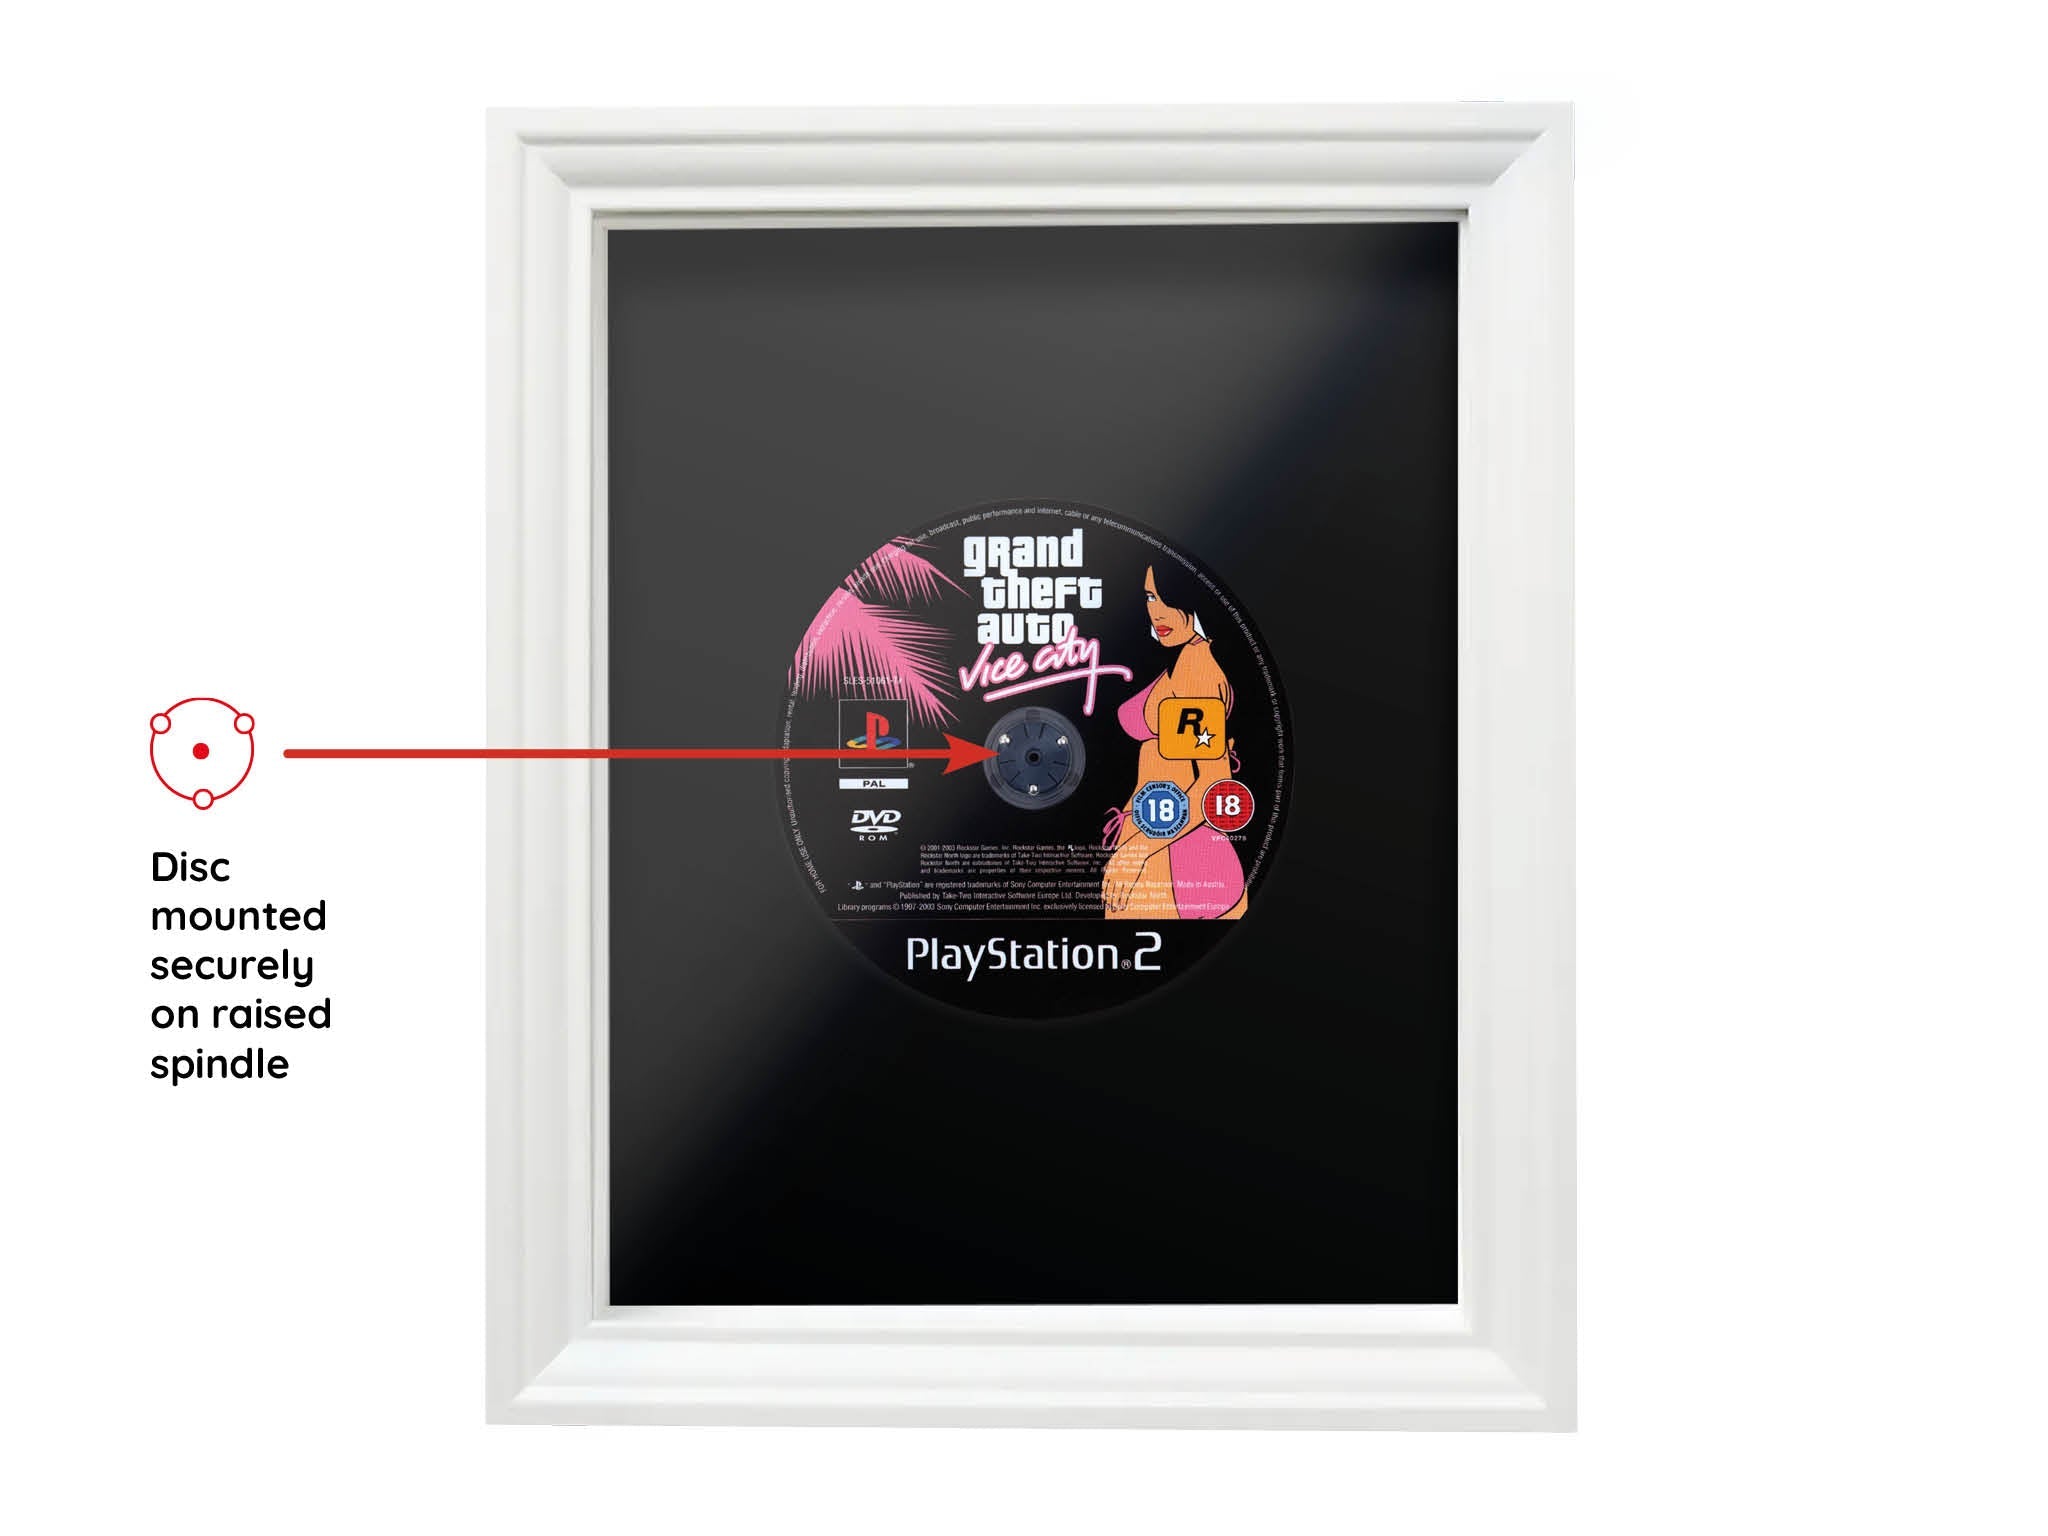 GTA Vice City (PS2) Framed Game - Frame-A-Game